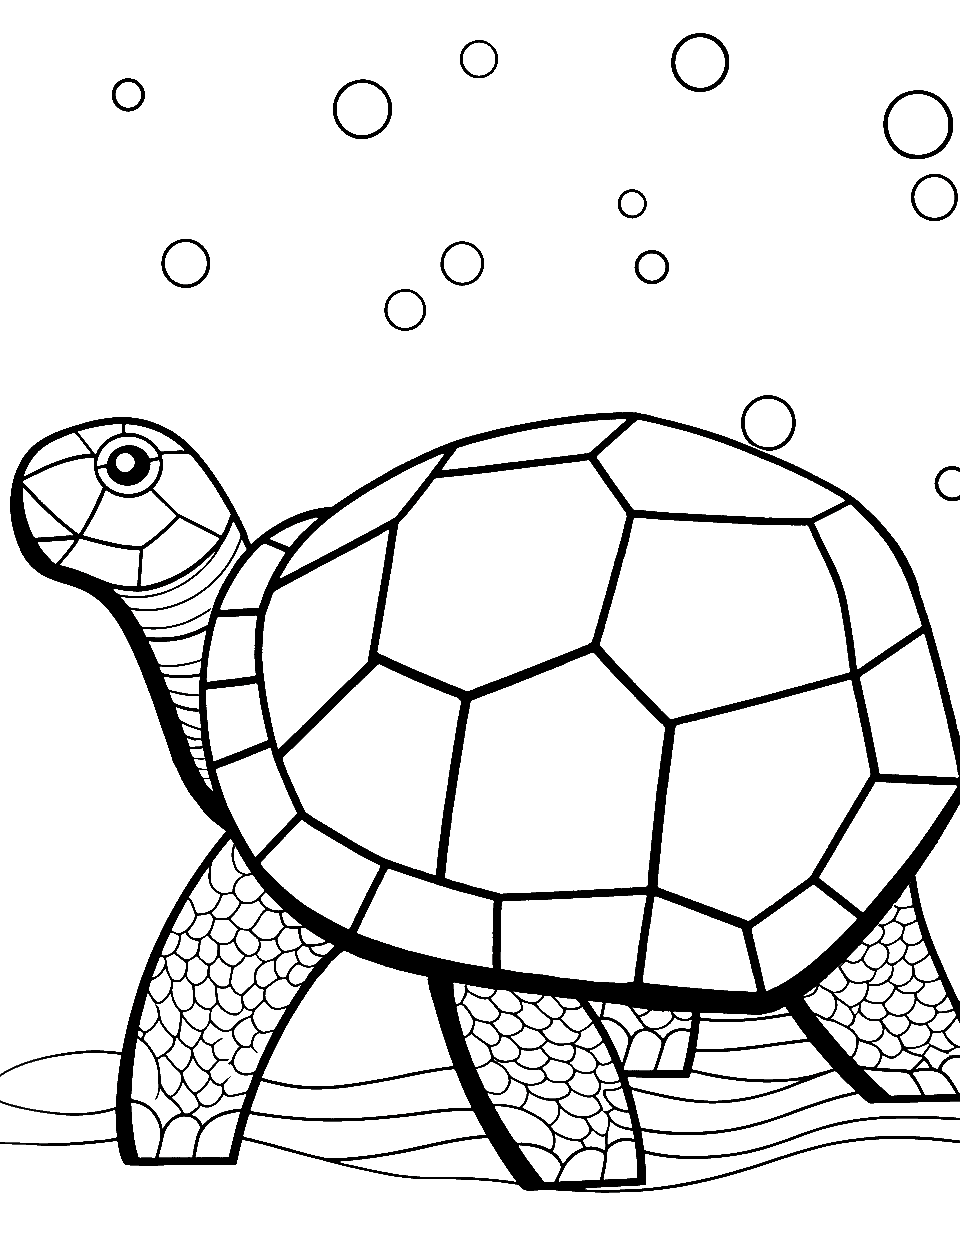 Geometric Turtle Design Coloring Page - A turtle made entirely of geometric shapes, offering a unique coloring challenge.